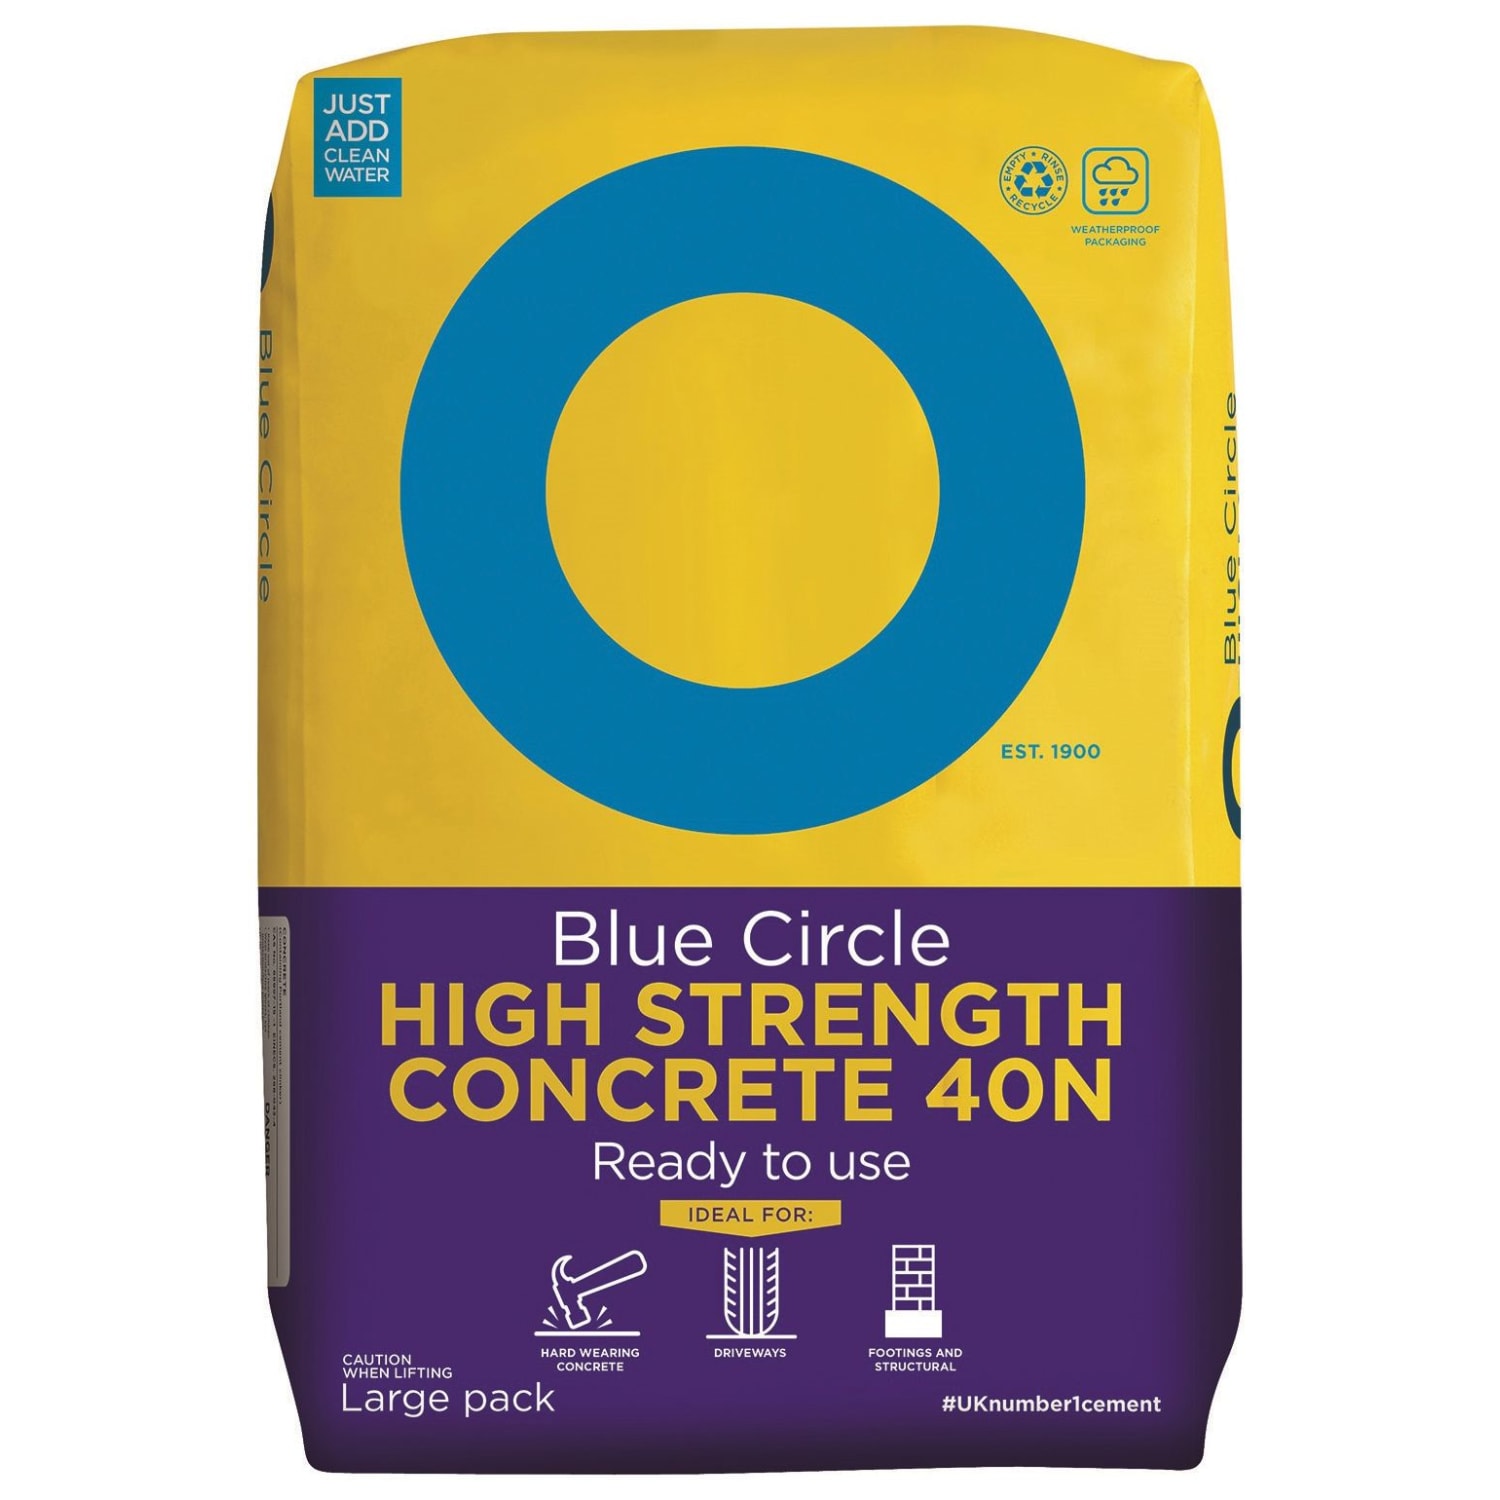 Blue Circle High Strength Ready To Use Concrete (40N) - 20kg